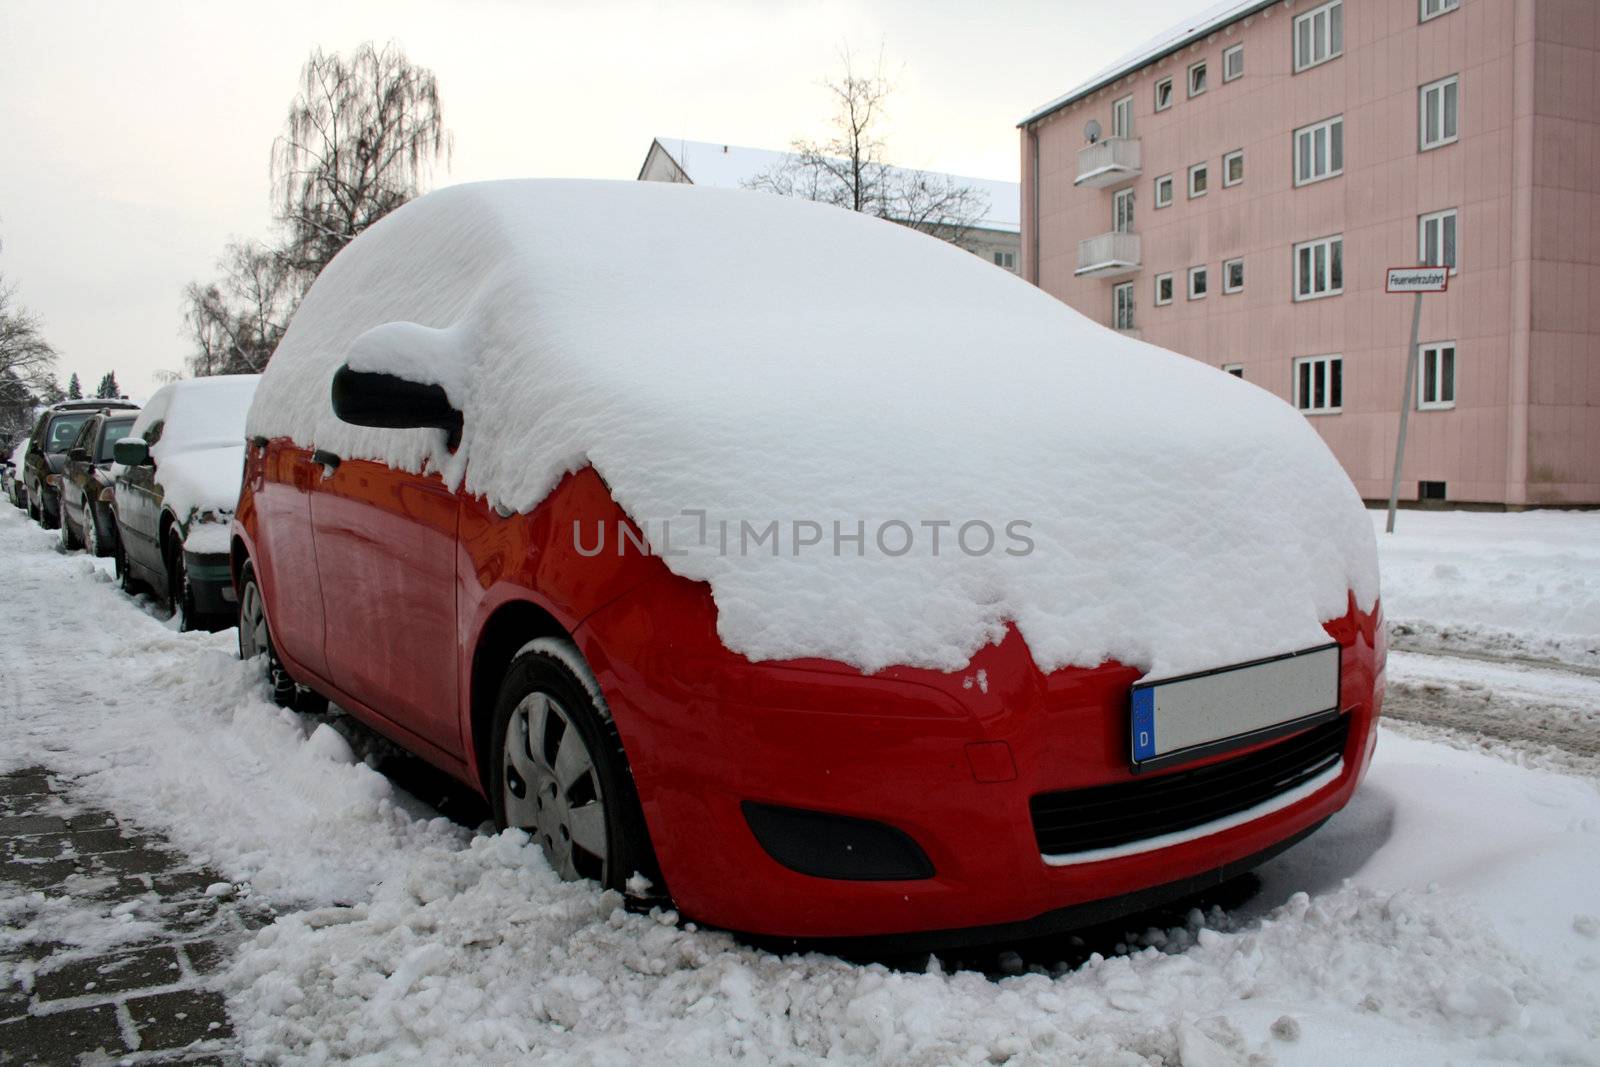 cars in the winter by photochecker